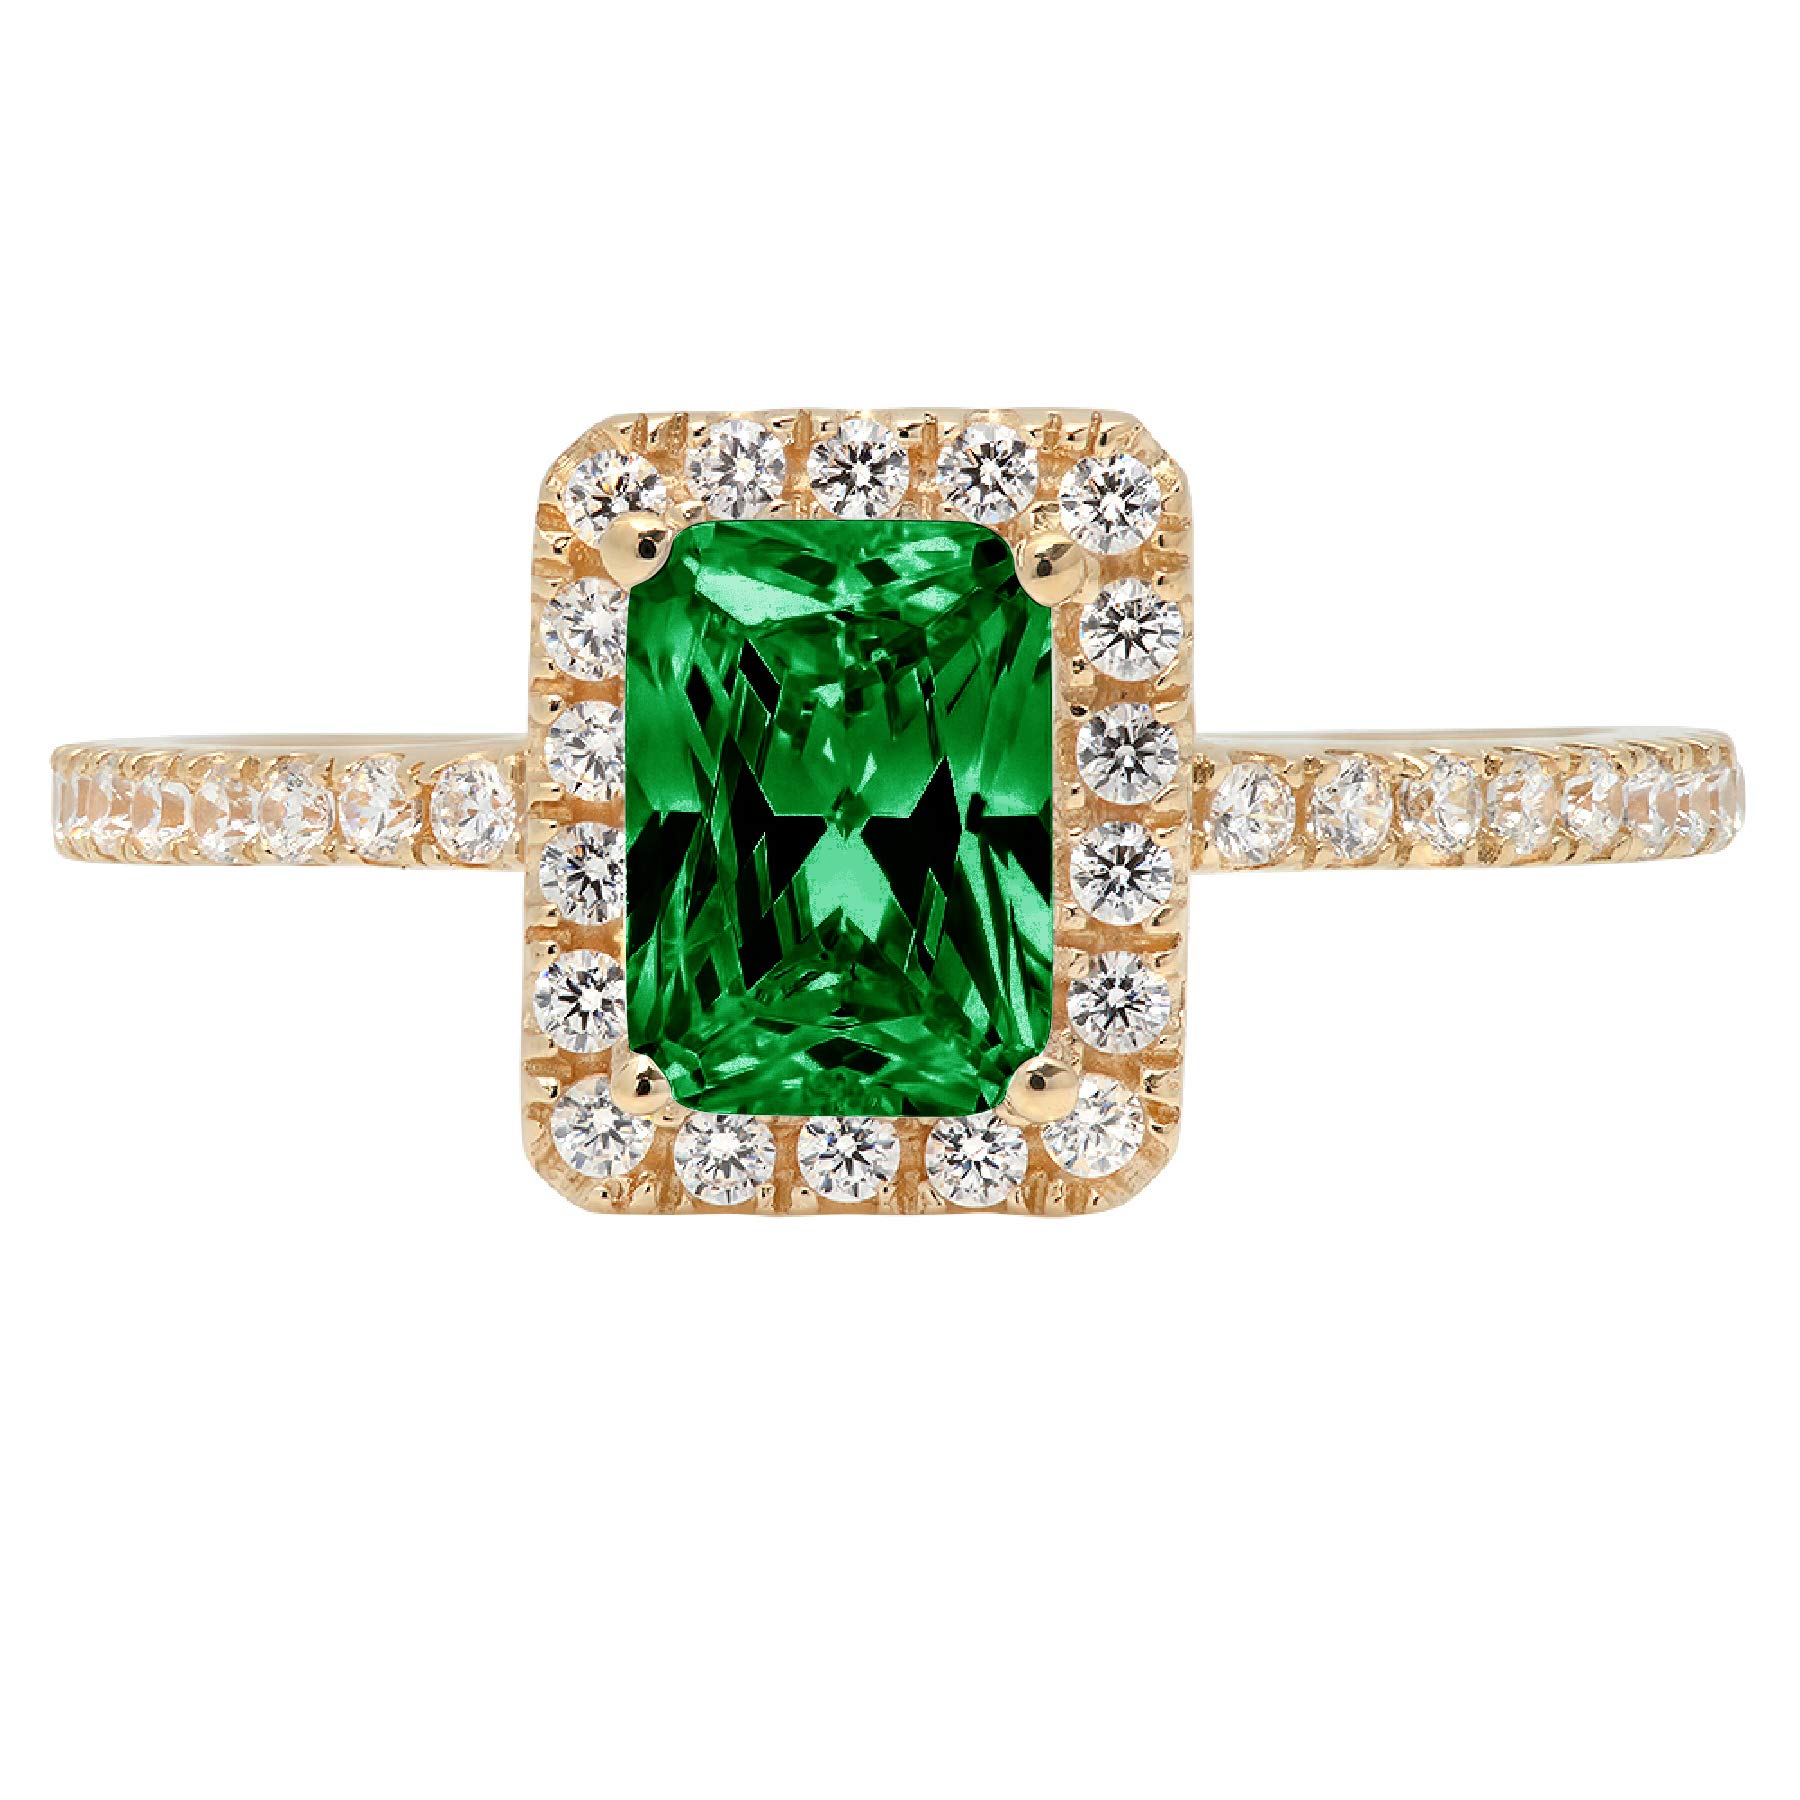 Clara Pucci 1.79ct Brilliant Emerald Cut Solitaire with accent Flawless Ideal VVS1 Simulated CZ Green Emerald Engagement Promise Statement Anniversary Bridal Wedding Designer Ring 14k Yellow Gold